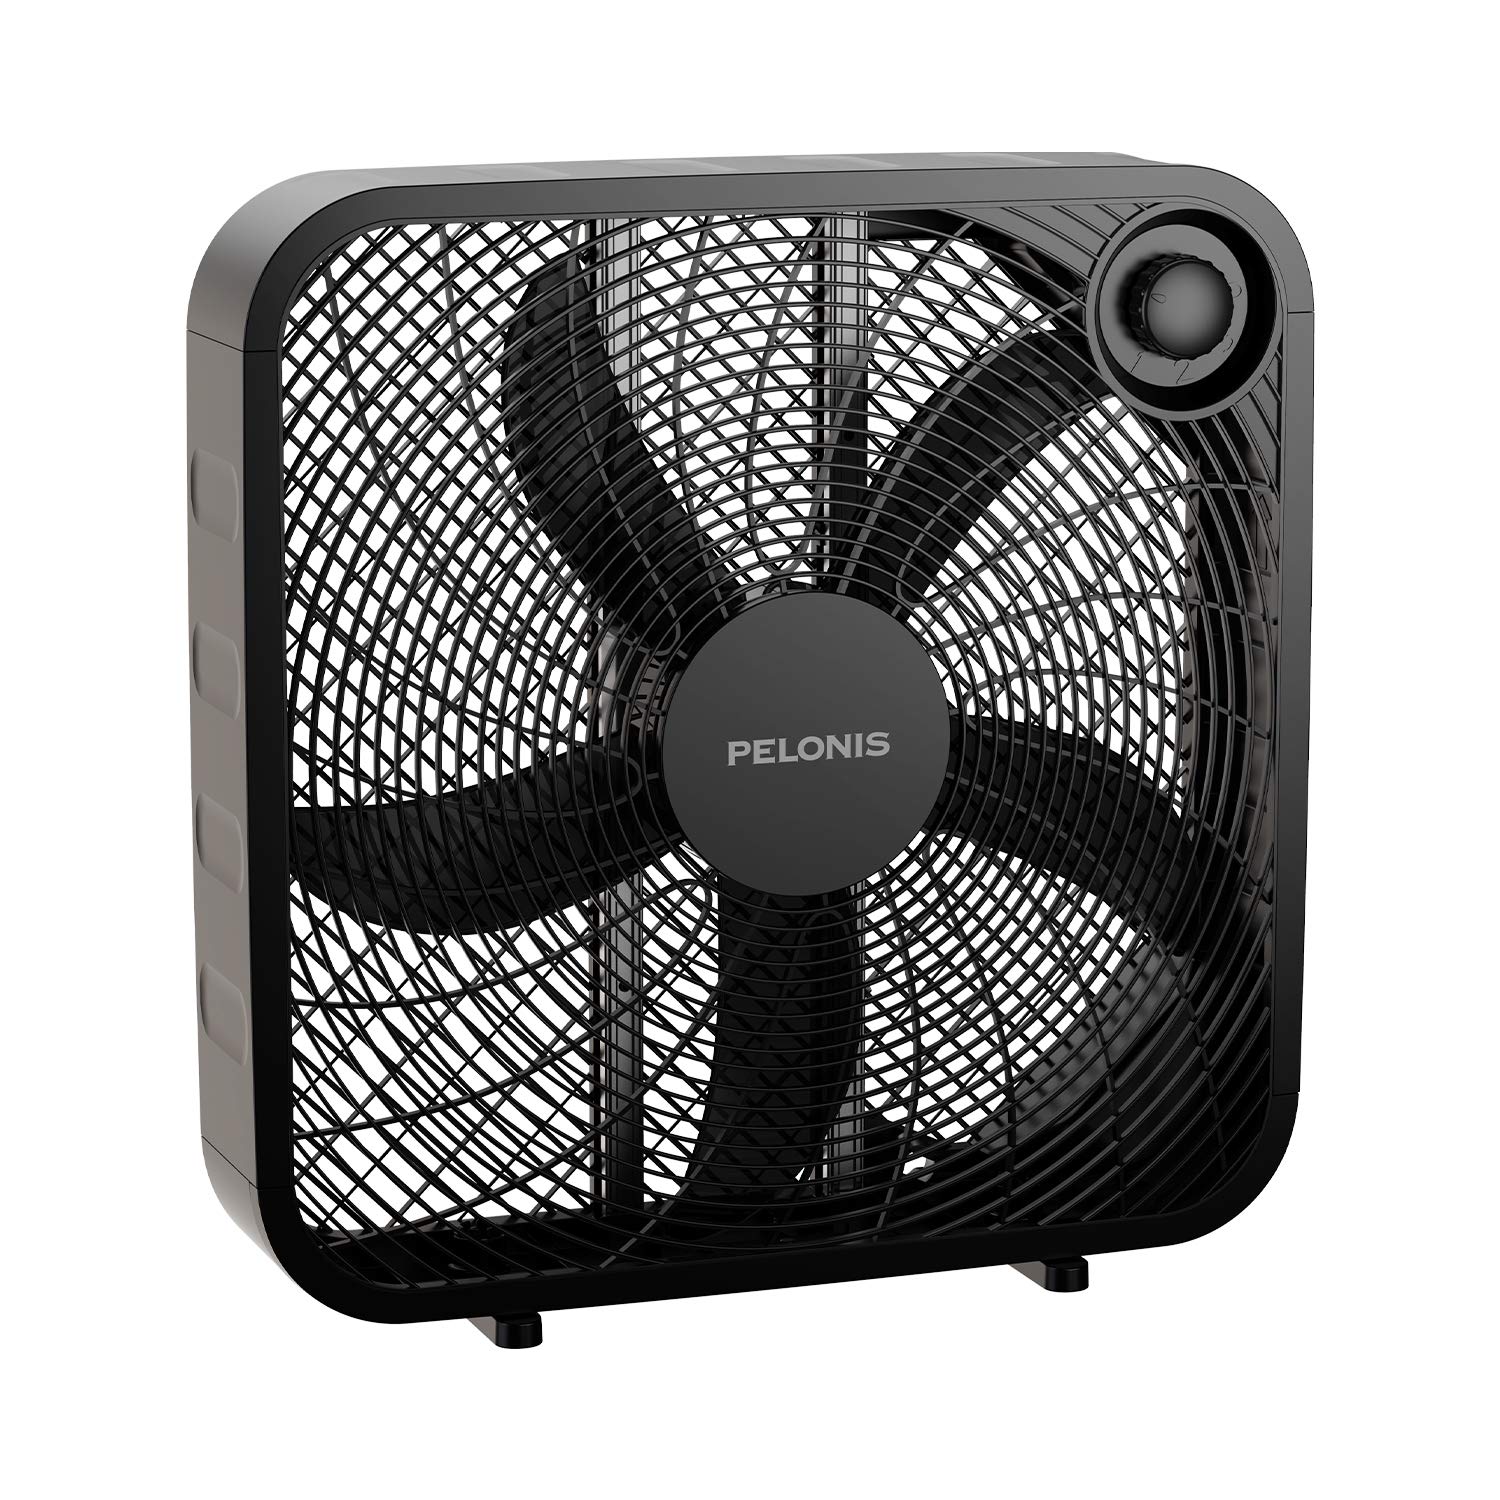 PELONIS 3-Speed Box Fan For Full-Force Circulation With Air Conditioner, Upgrade Floor Fan, Black